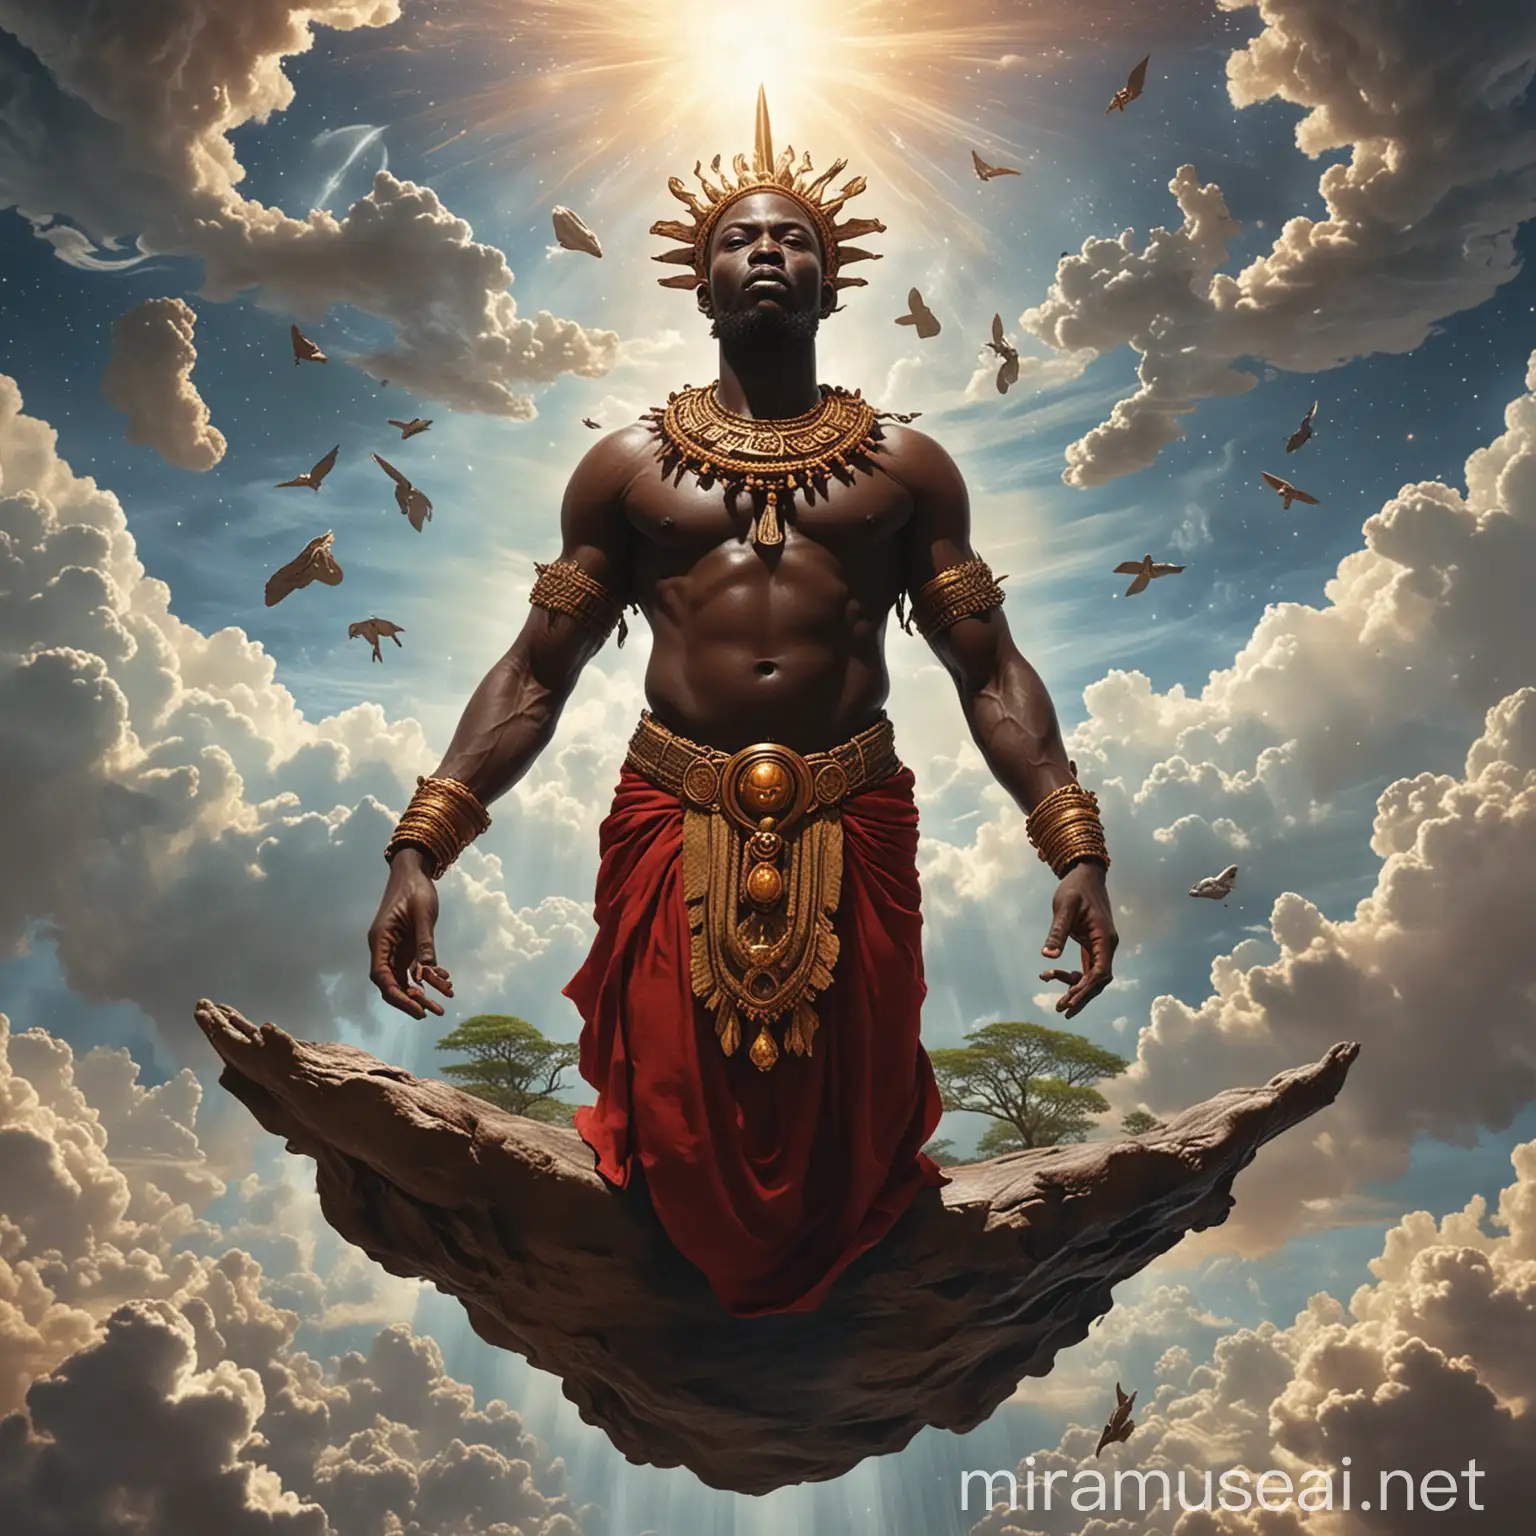 African Deity Serenely Ascending in Primal Paradise